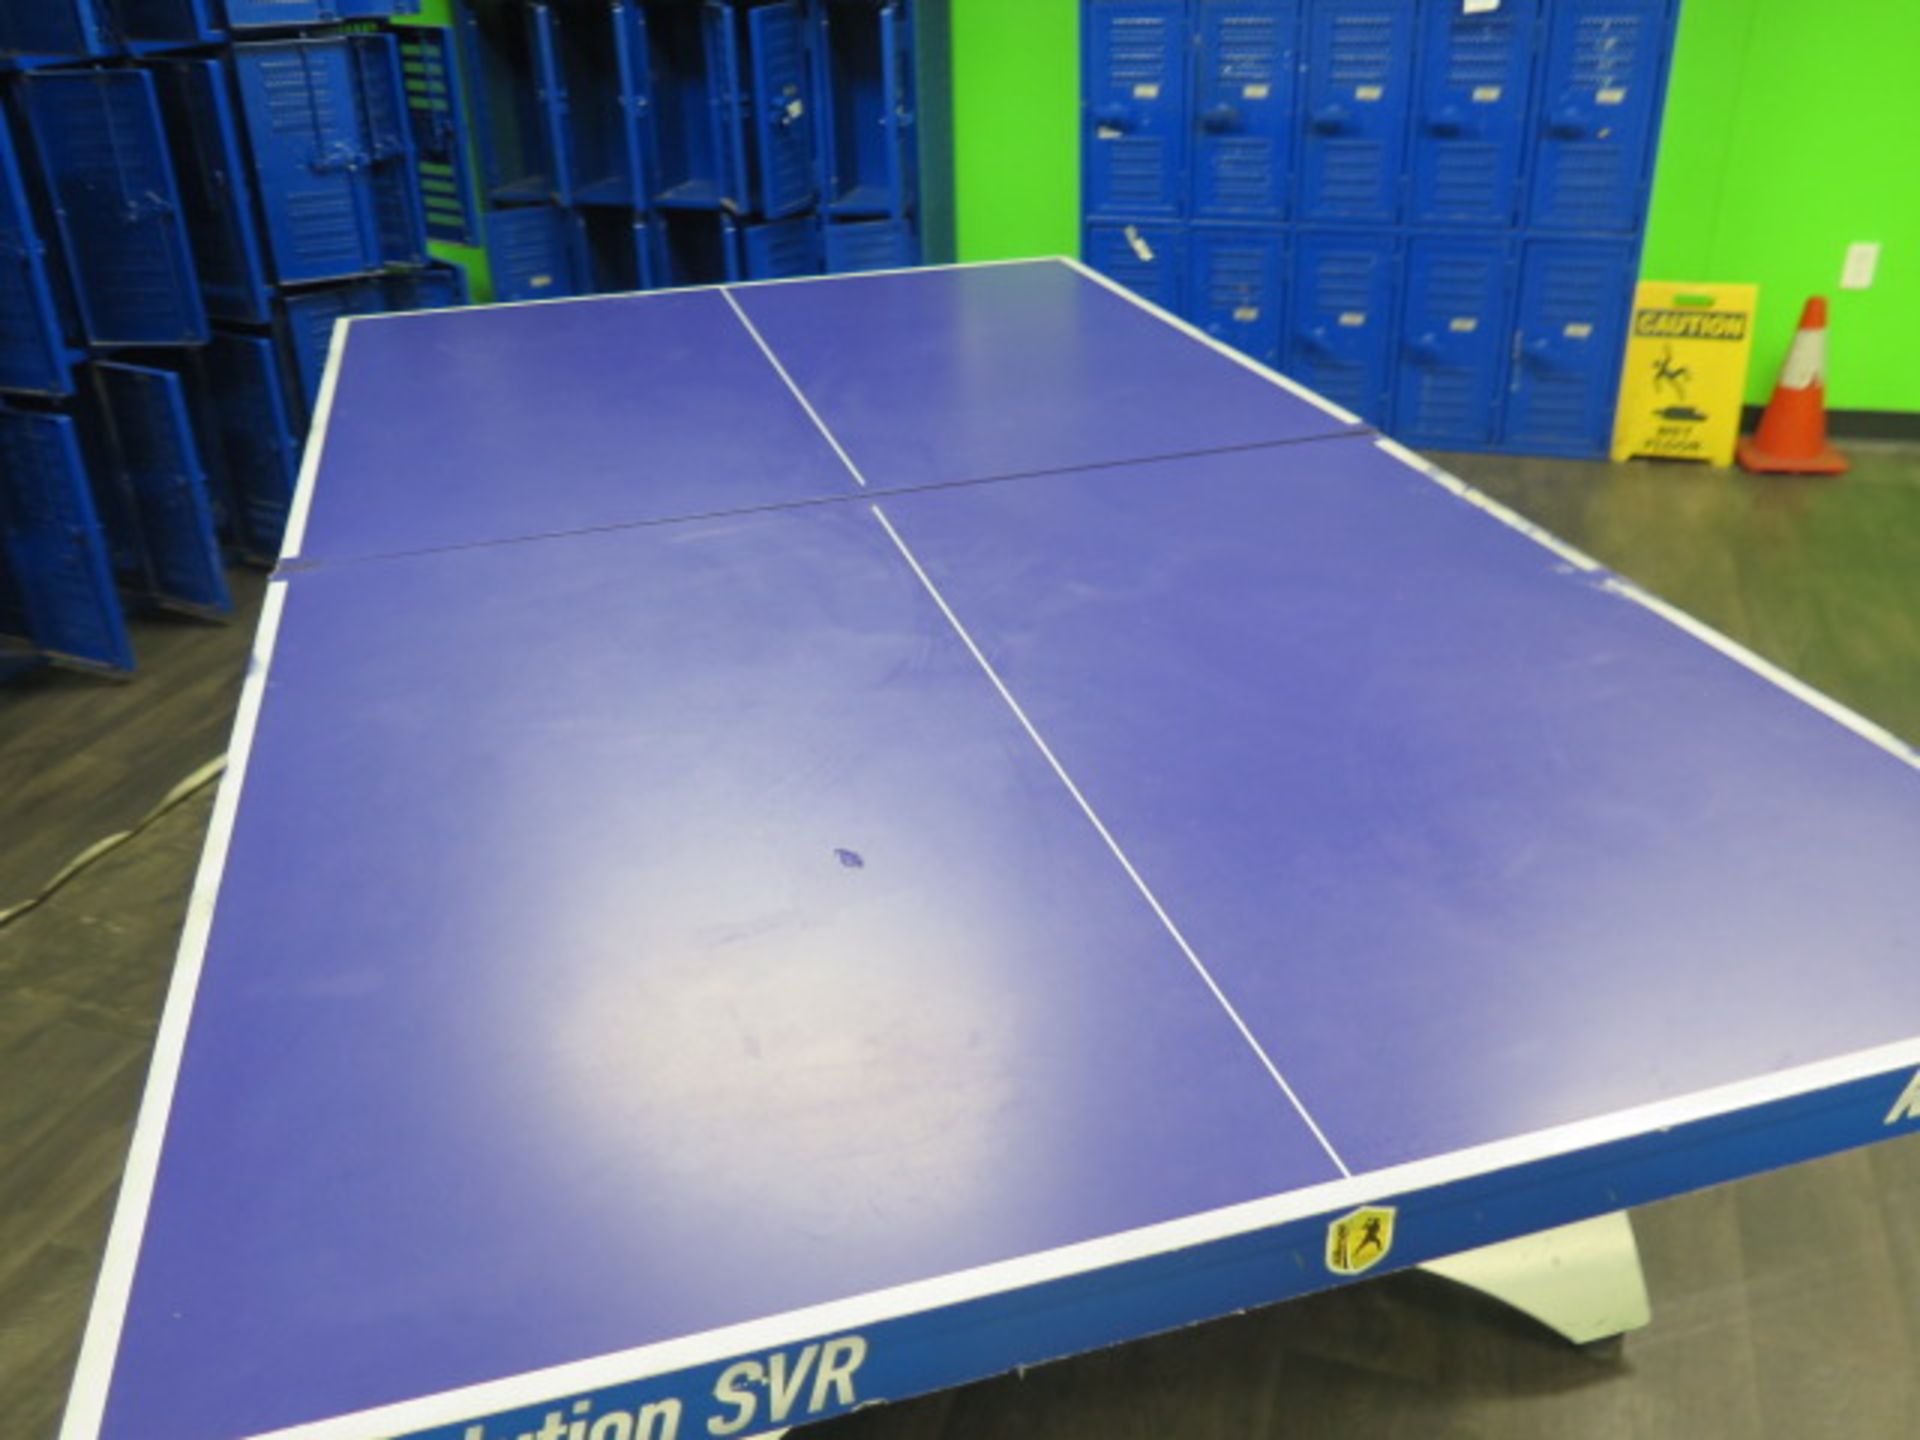 Killerspin "Revolution SVR" Professional Series Ping-Pong Table (SOLD AS-IS - NO WARRANTY) - Image 4 of 8